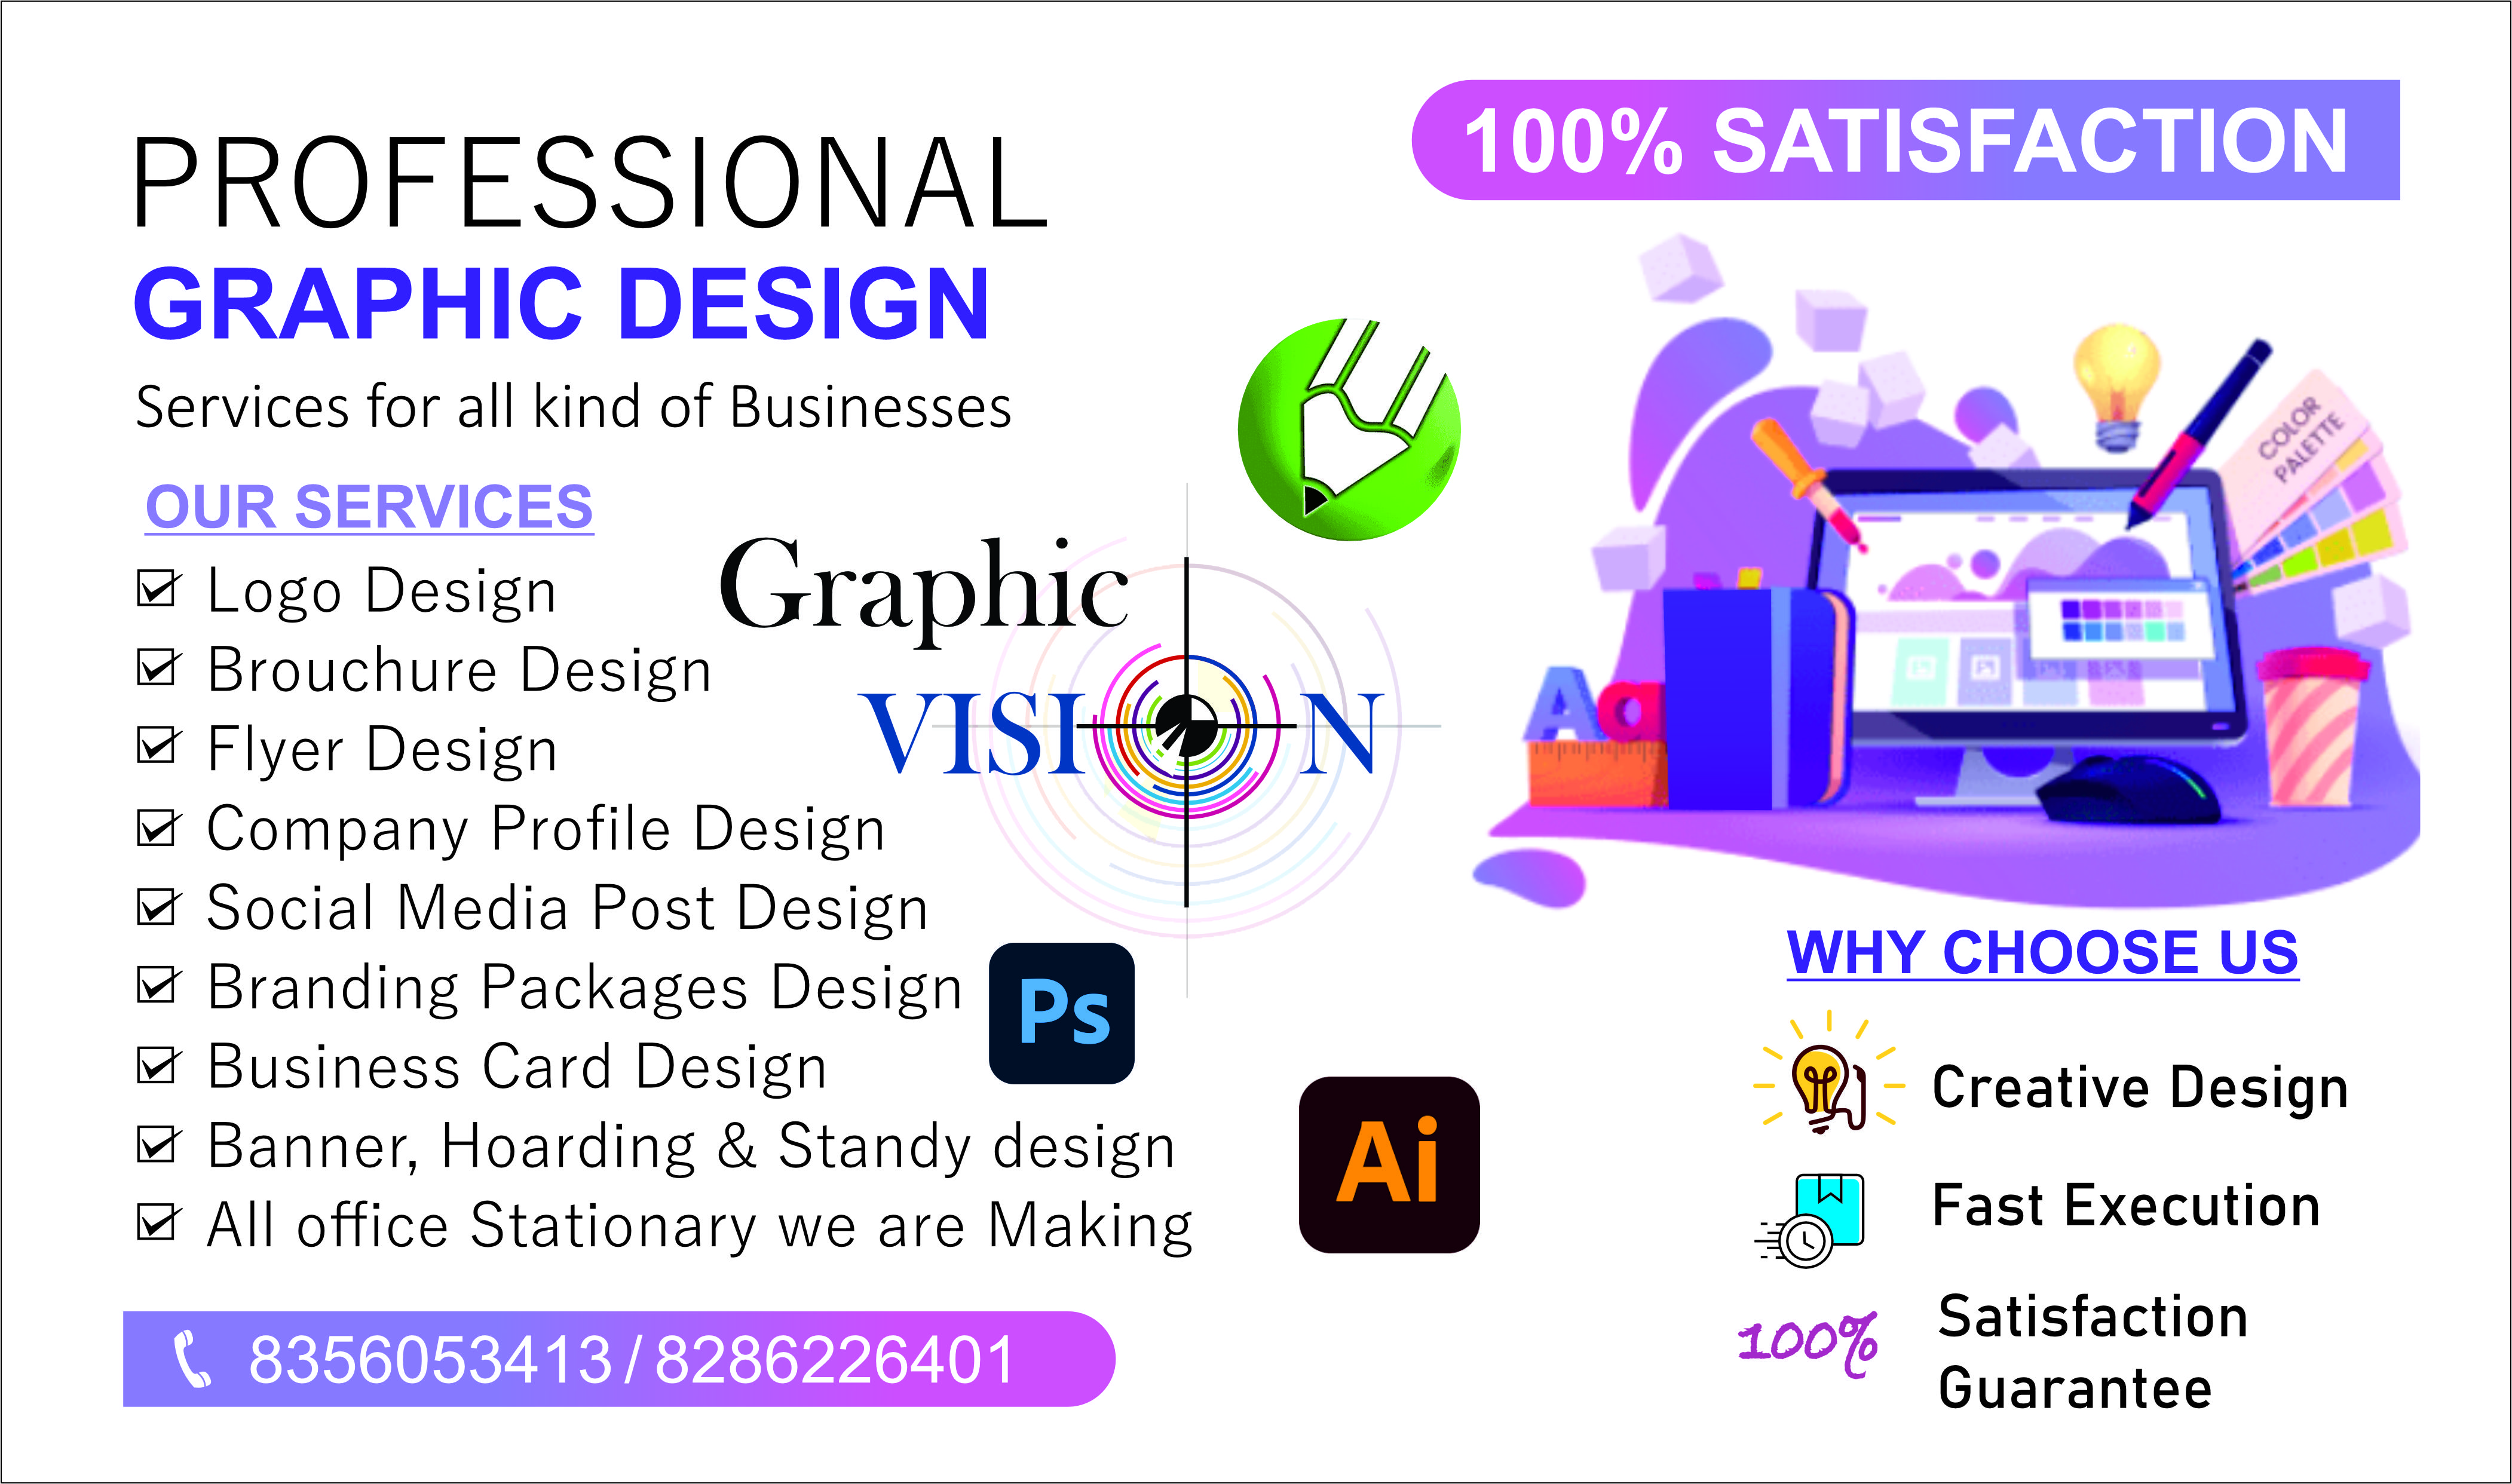 PROFESSIONAL

GRAPHIC DESIGN

Services for all kind of Businesses
OUR SERVICES
M Logo Design Graphic
M Brouchure Design 7R
M Flyer Design VISK®)
M Company Profile Design

M Social Media Post Design
M Branding Packages Design
M Business Card Design

M Banner, Hoarding &amp; Standy design
M All office Stationary we are Making

   

WHY CHOOSE US

 

&amp;) Creative Design

 

oO Fast Execution

100% Satisfaction
Guarantee

\ 8356053413/8286226401